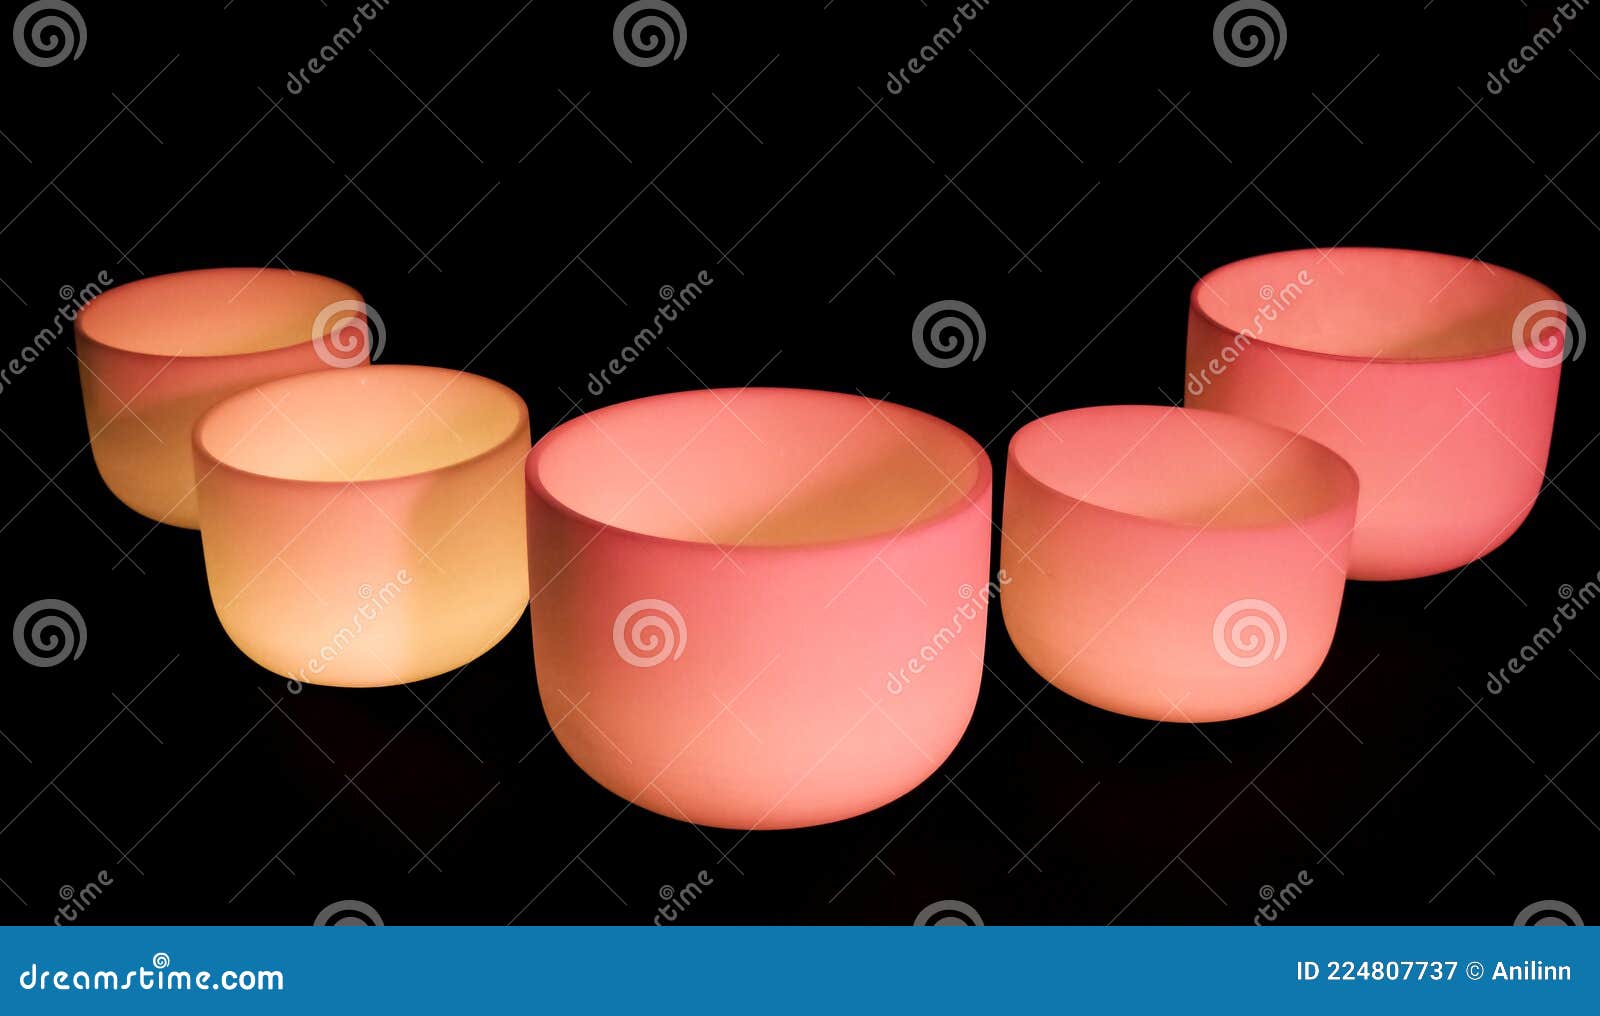 crystal singing bowls with pink light on a dark background